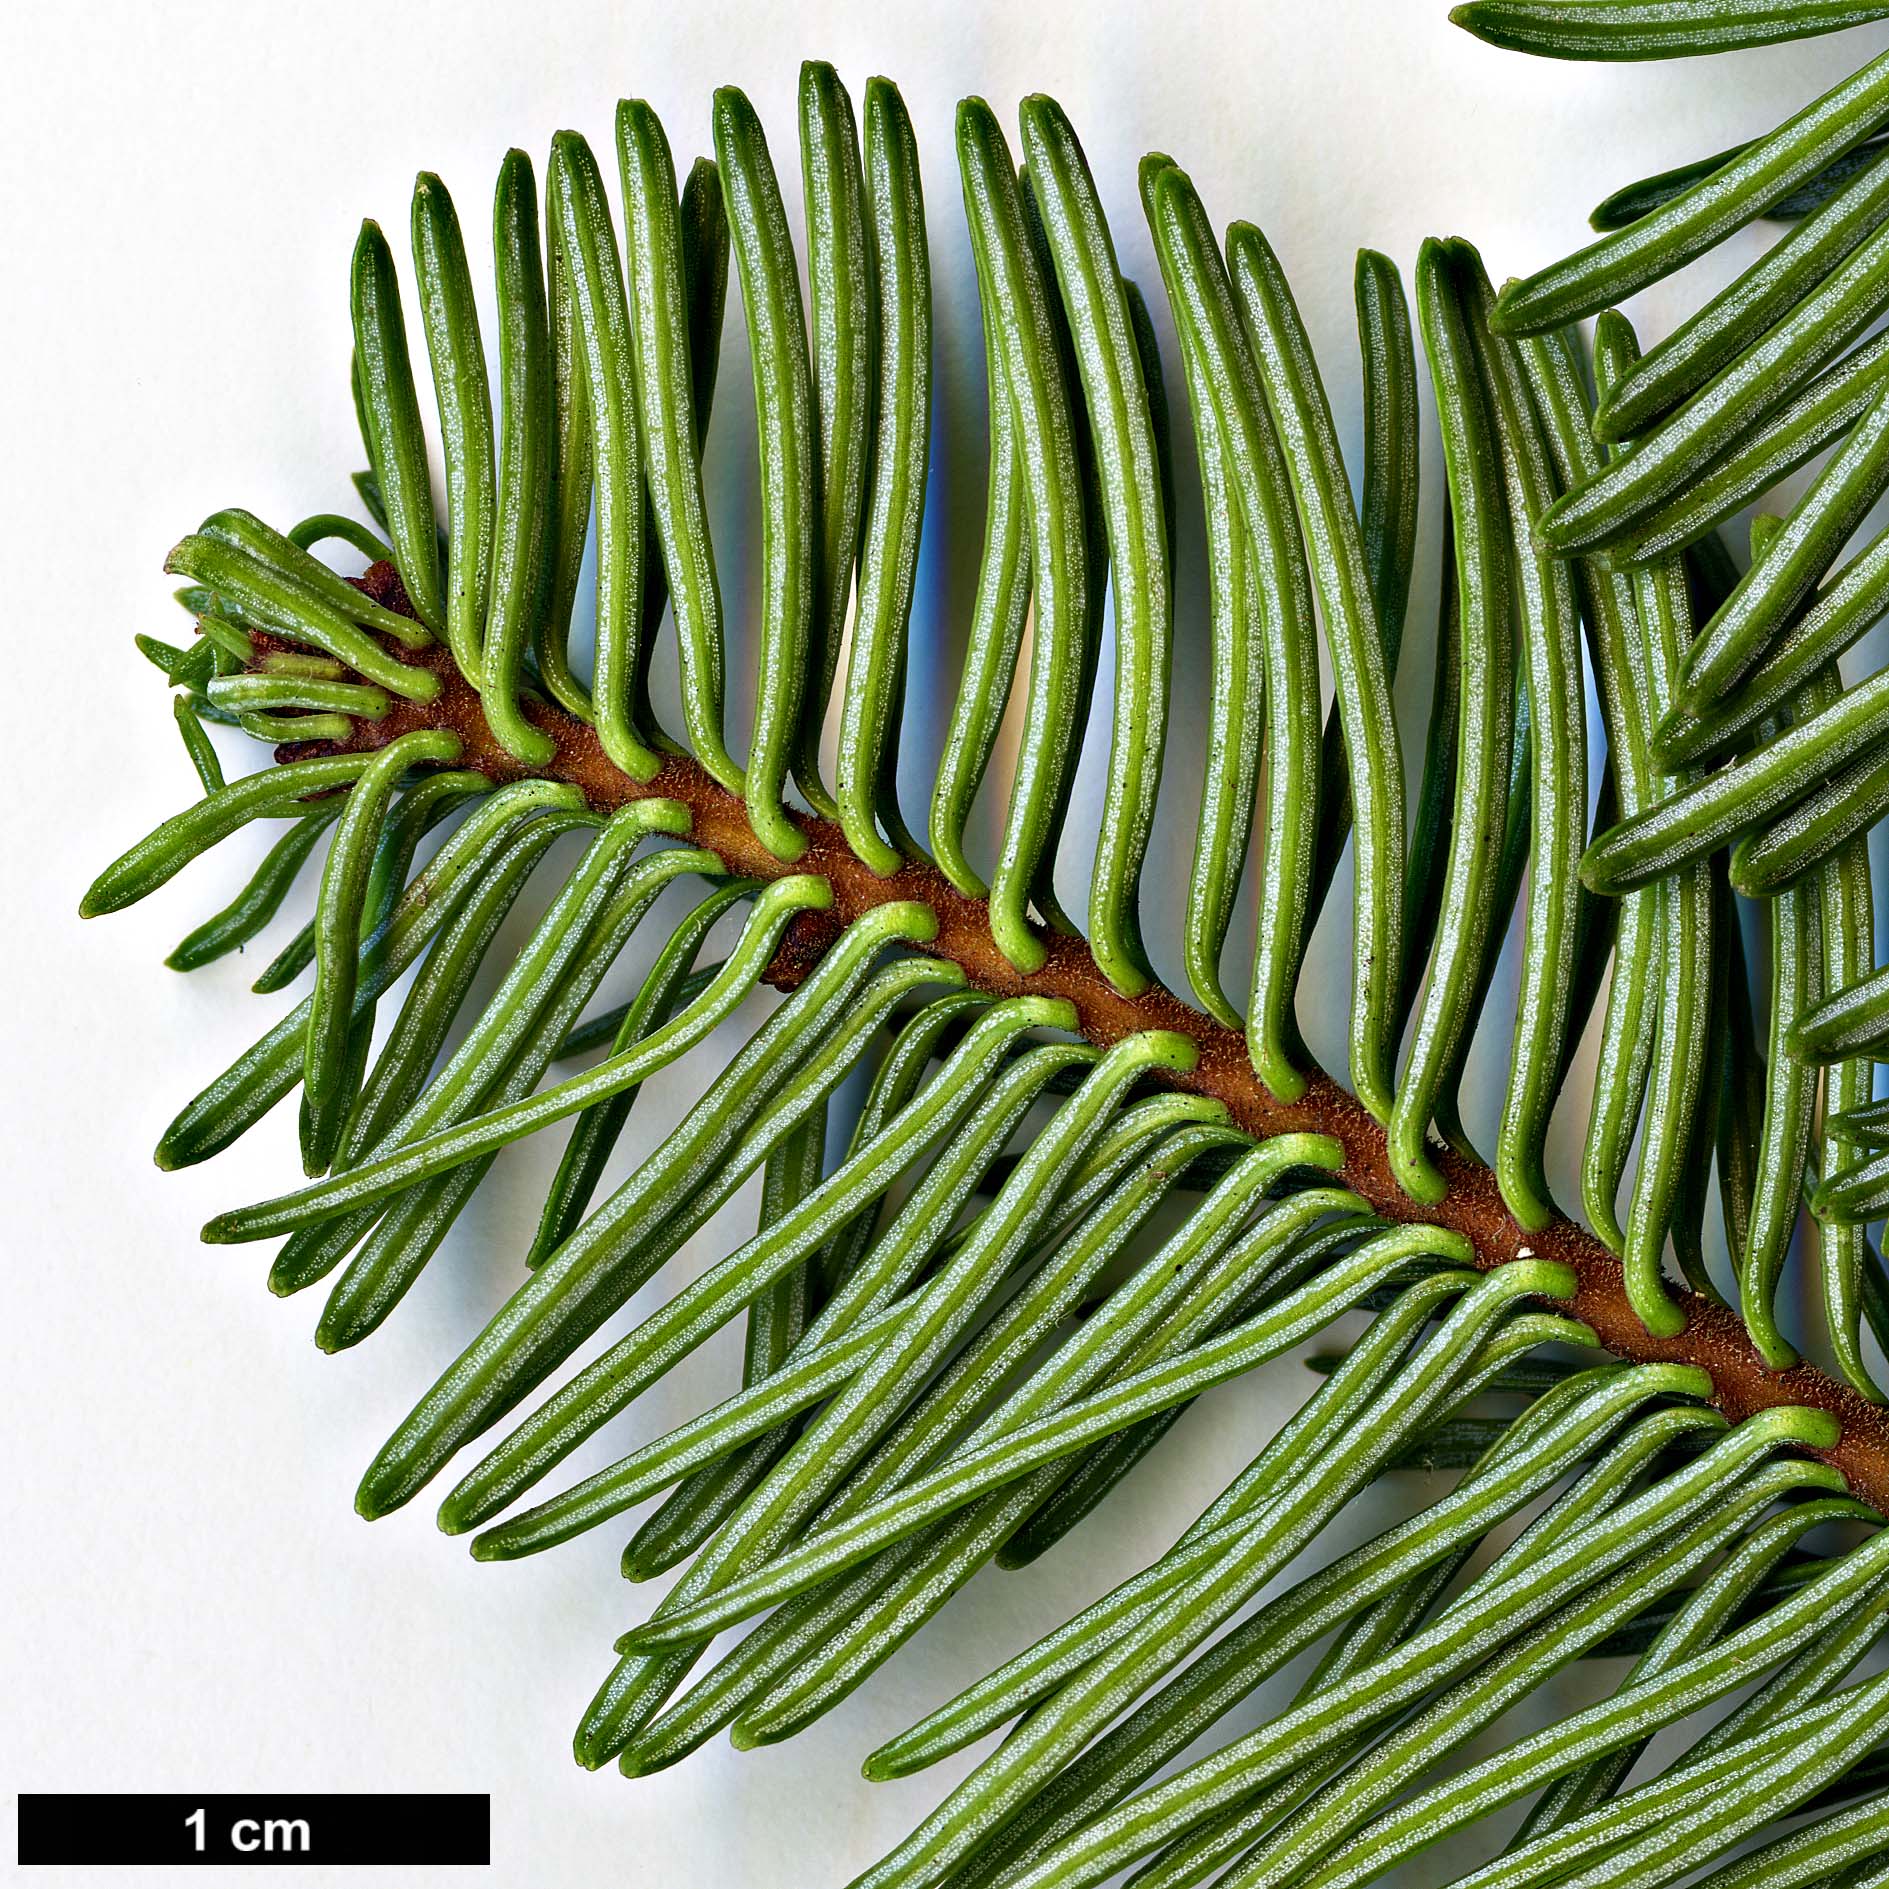 High resolution image: Family: Pinaceae - Genus: Abies - Taxon: procera